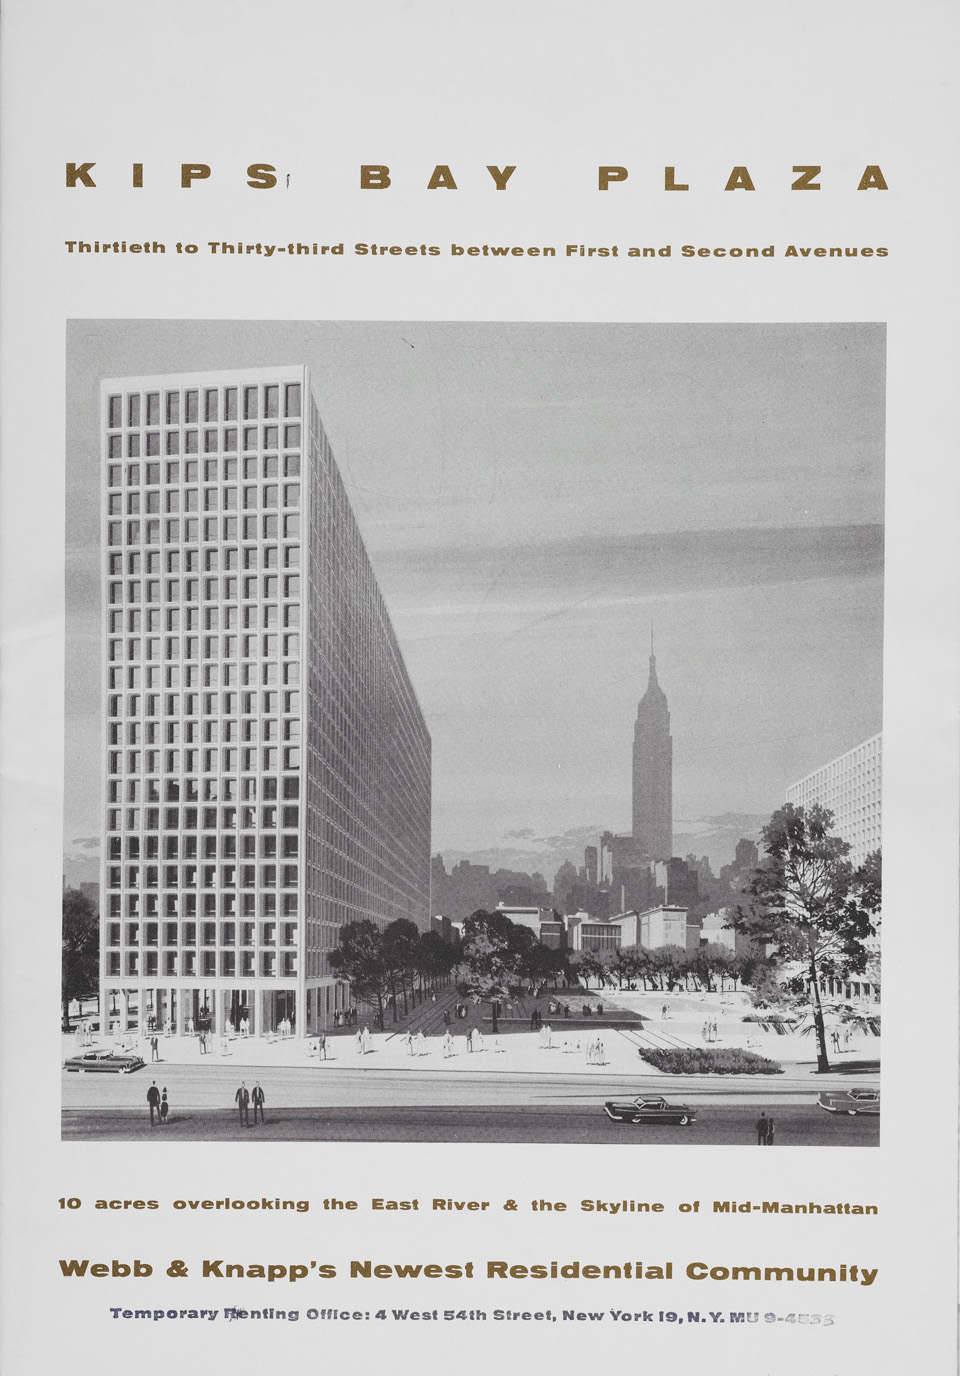  New York Real Estate Brochures Collection - Columbia University